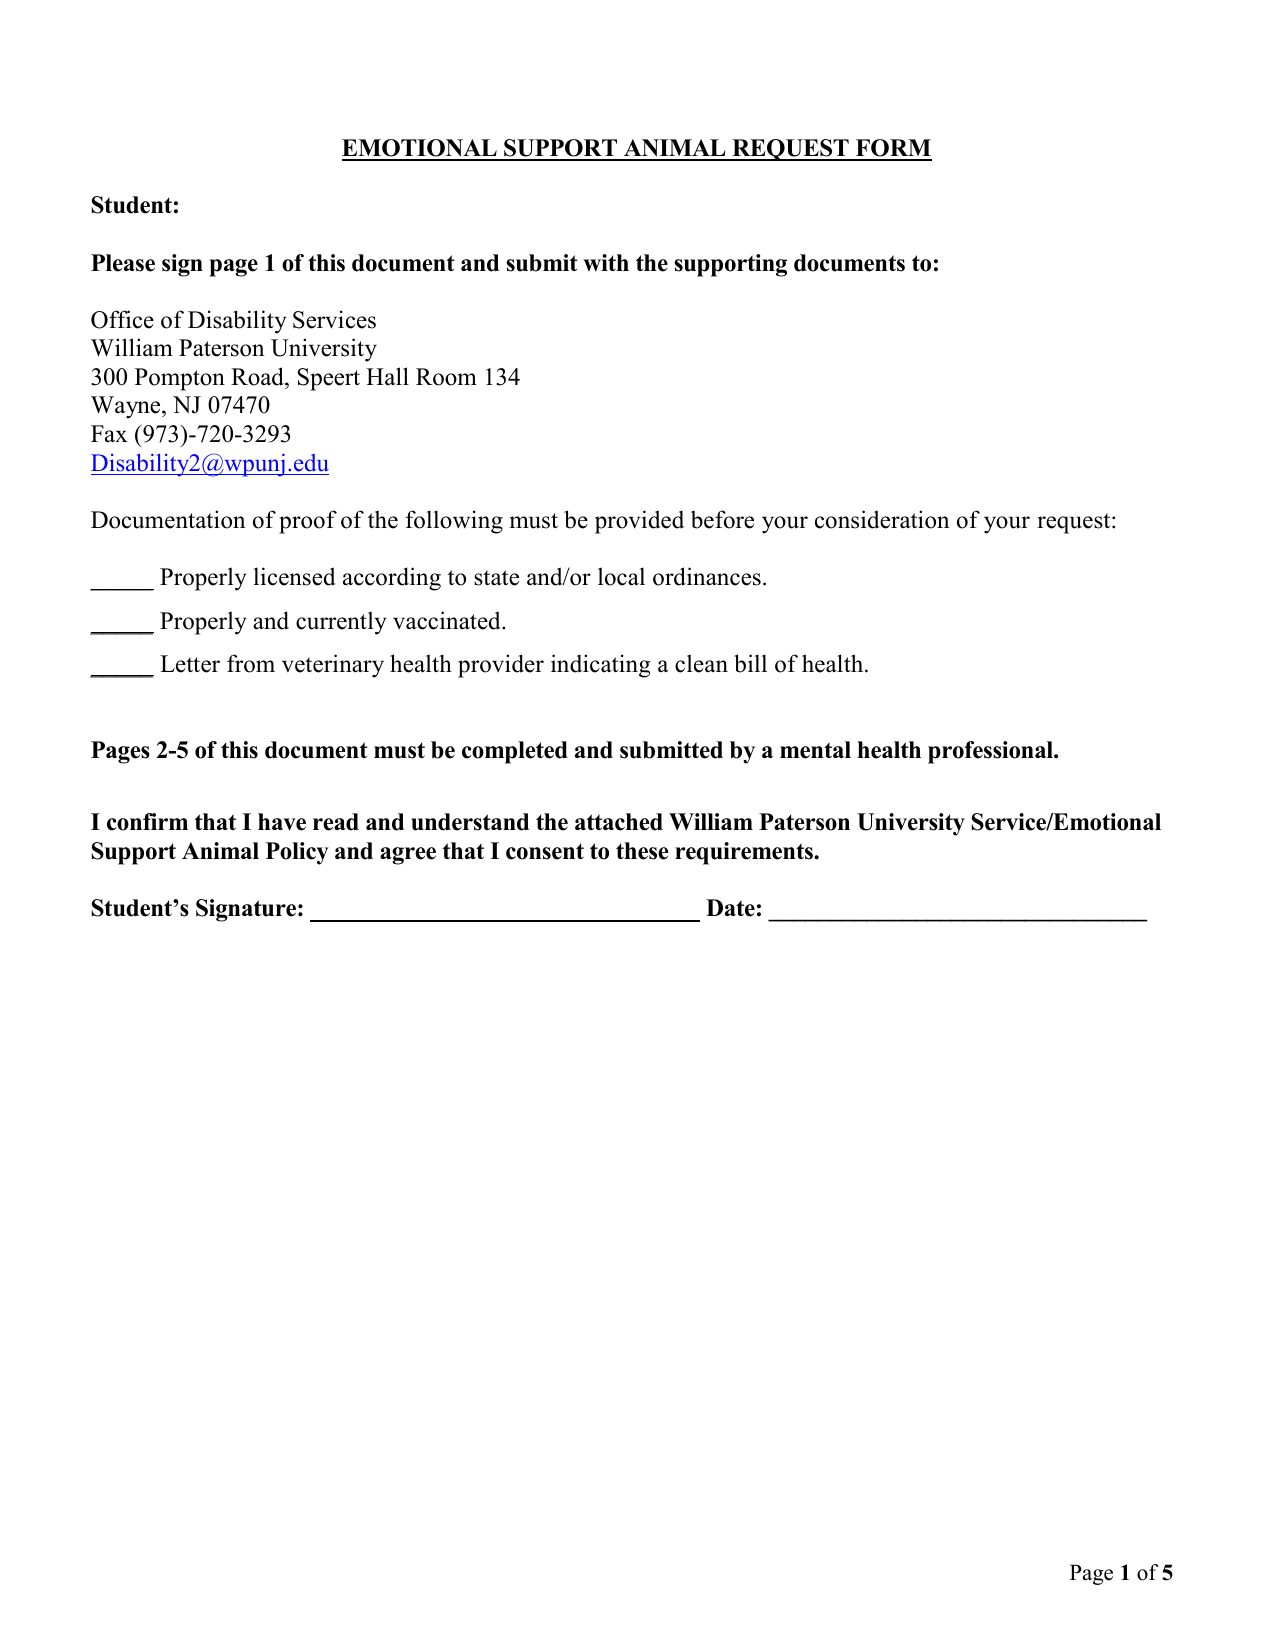 emotional support animal request form student